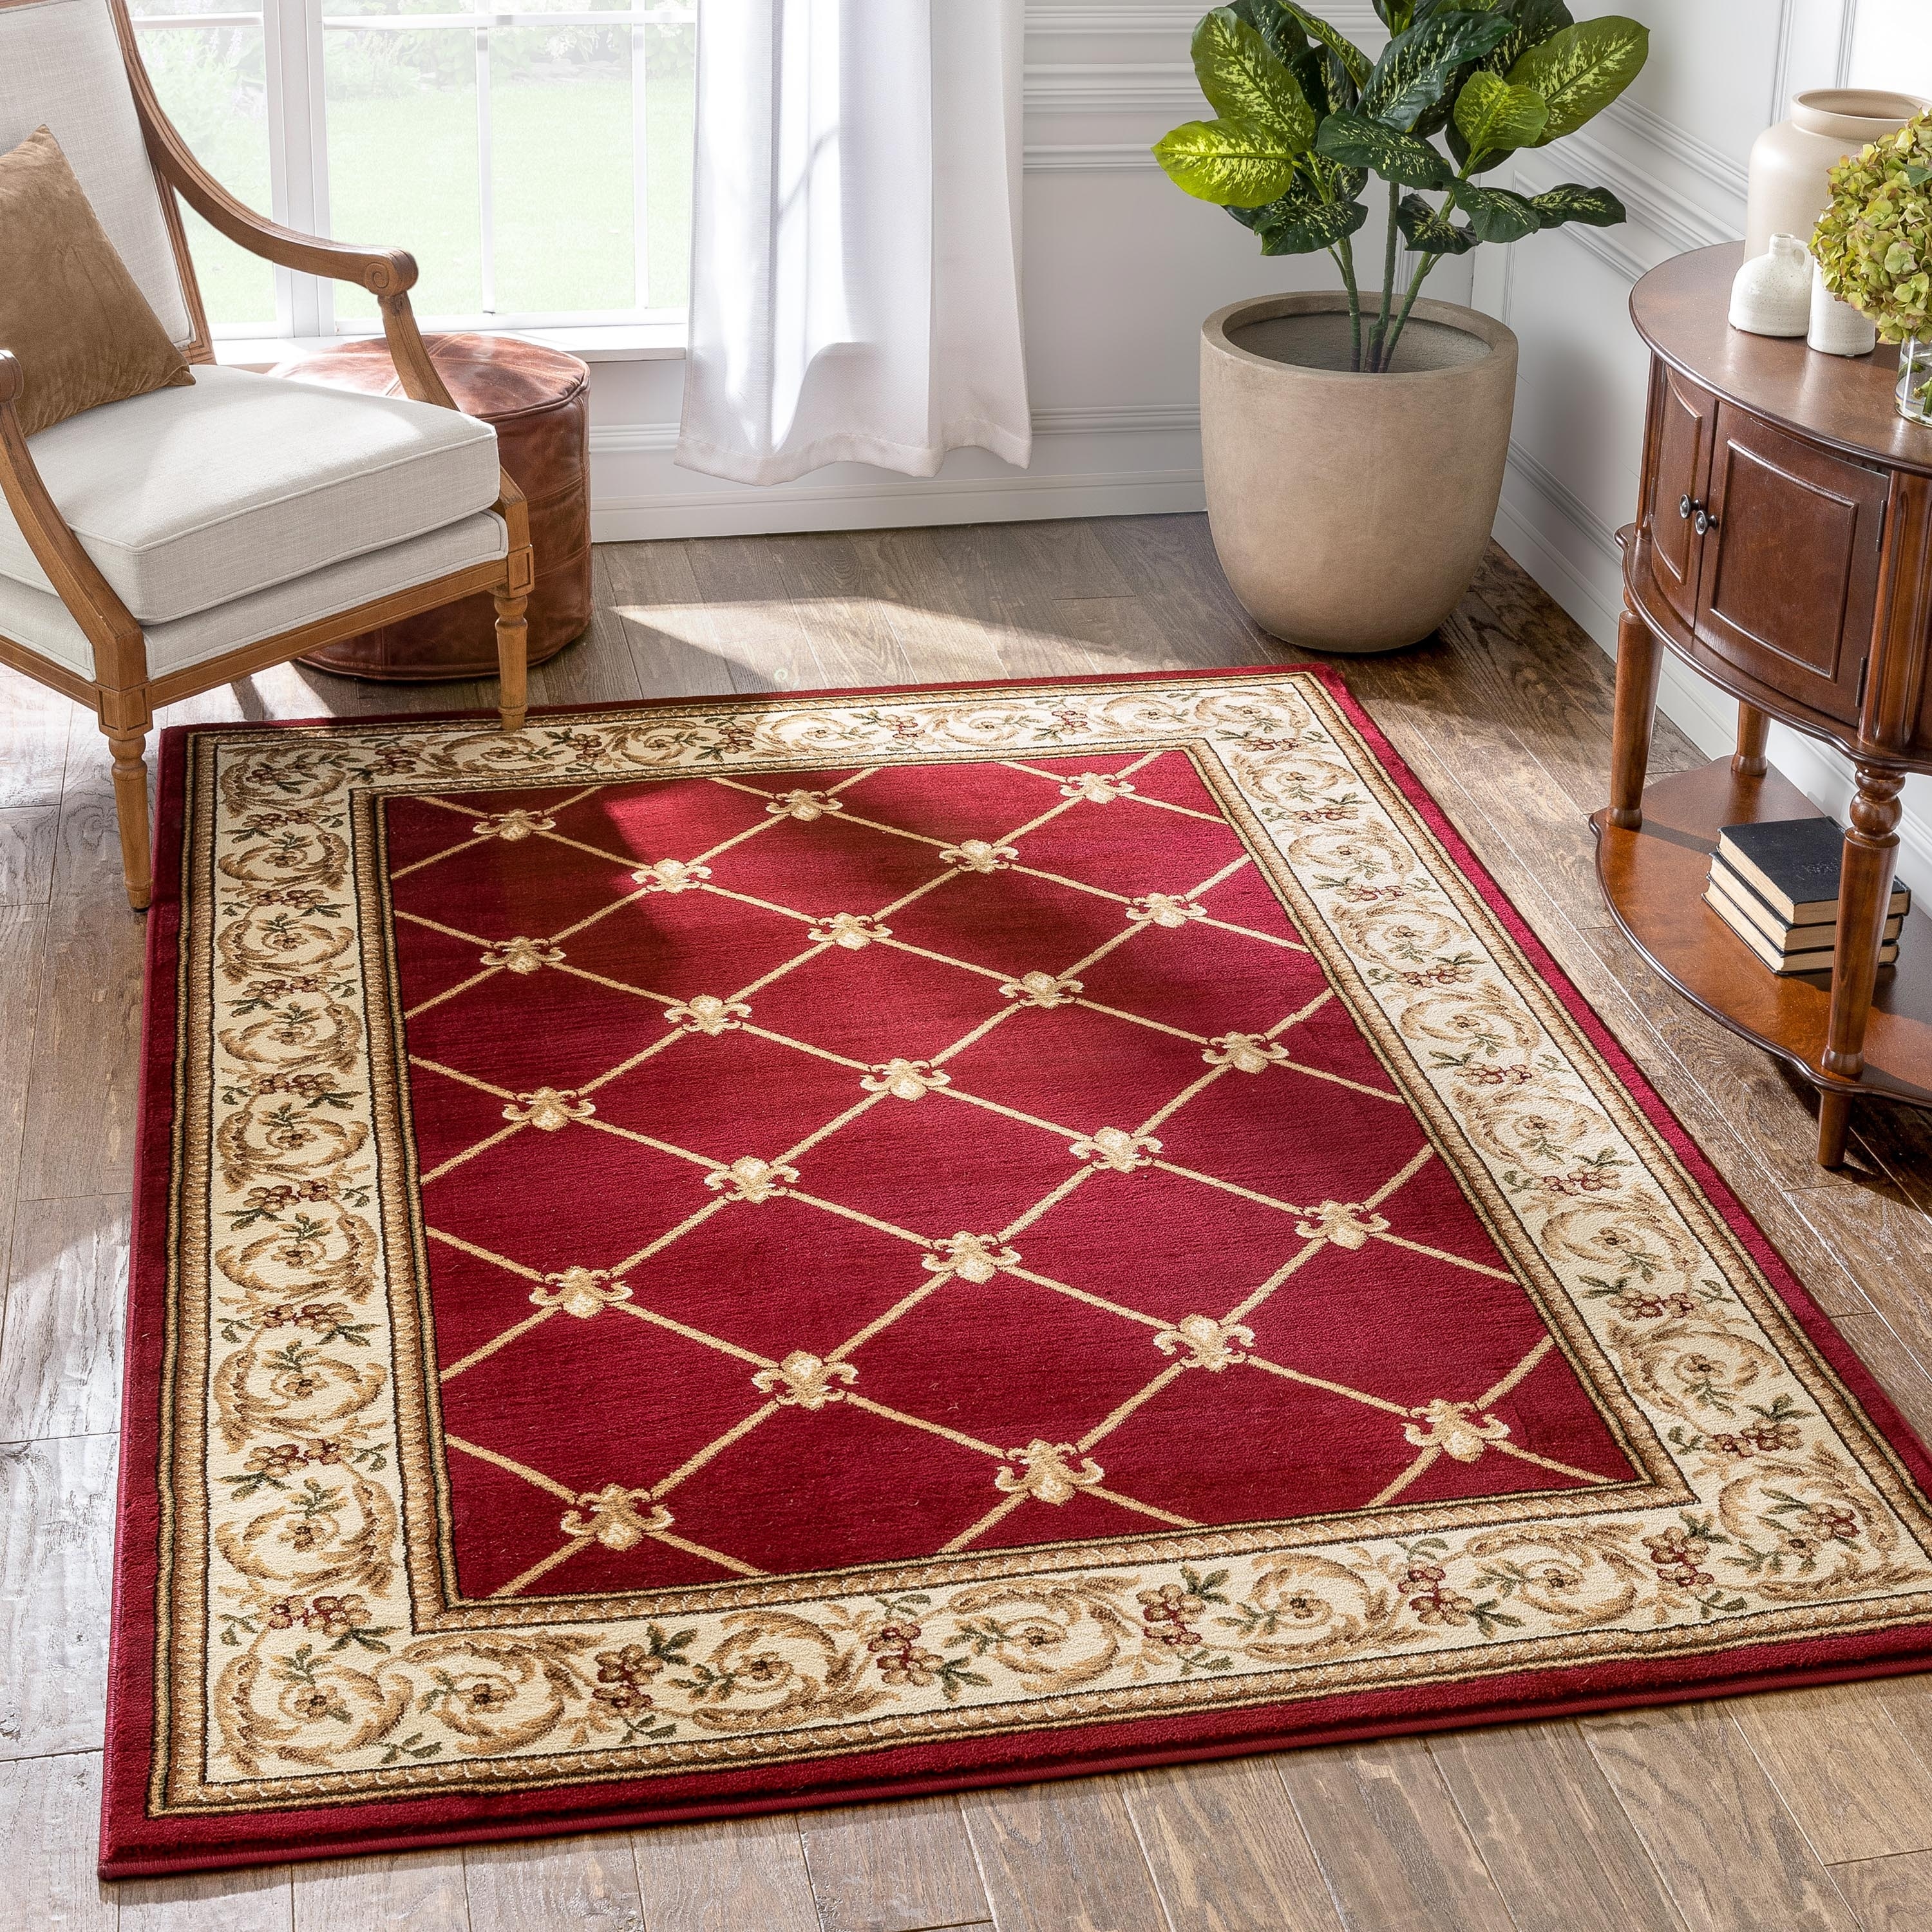 Farmhouse Well Woven Area Rugs - Bed Bath & Beyond